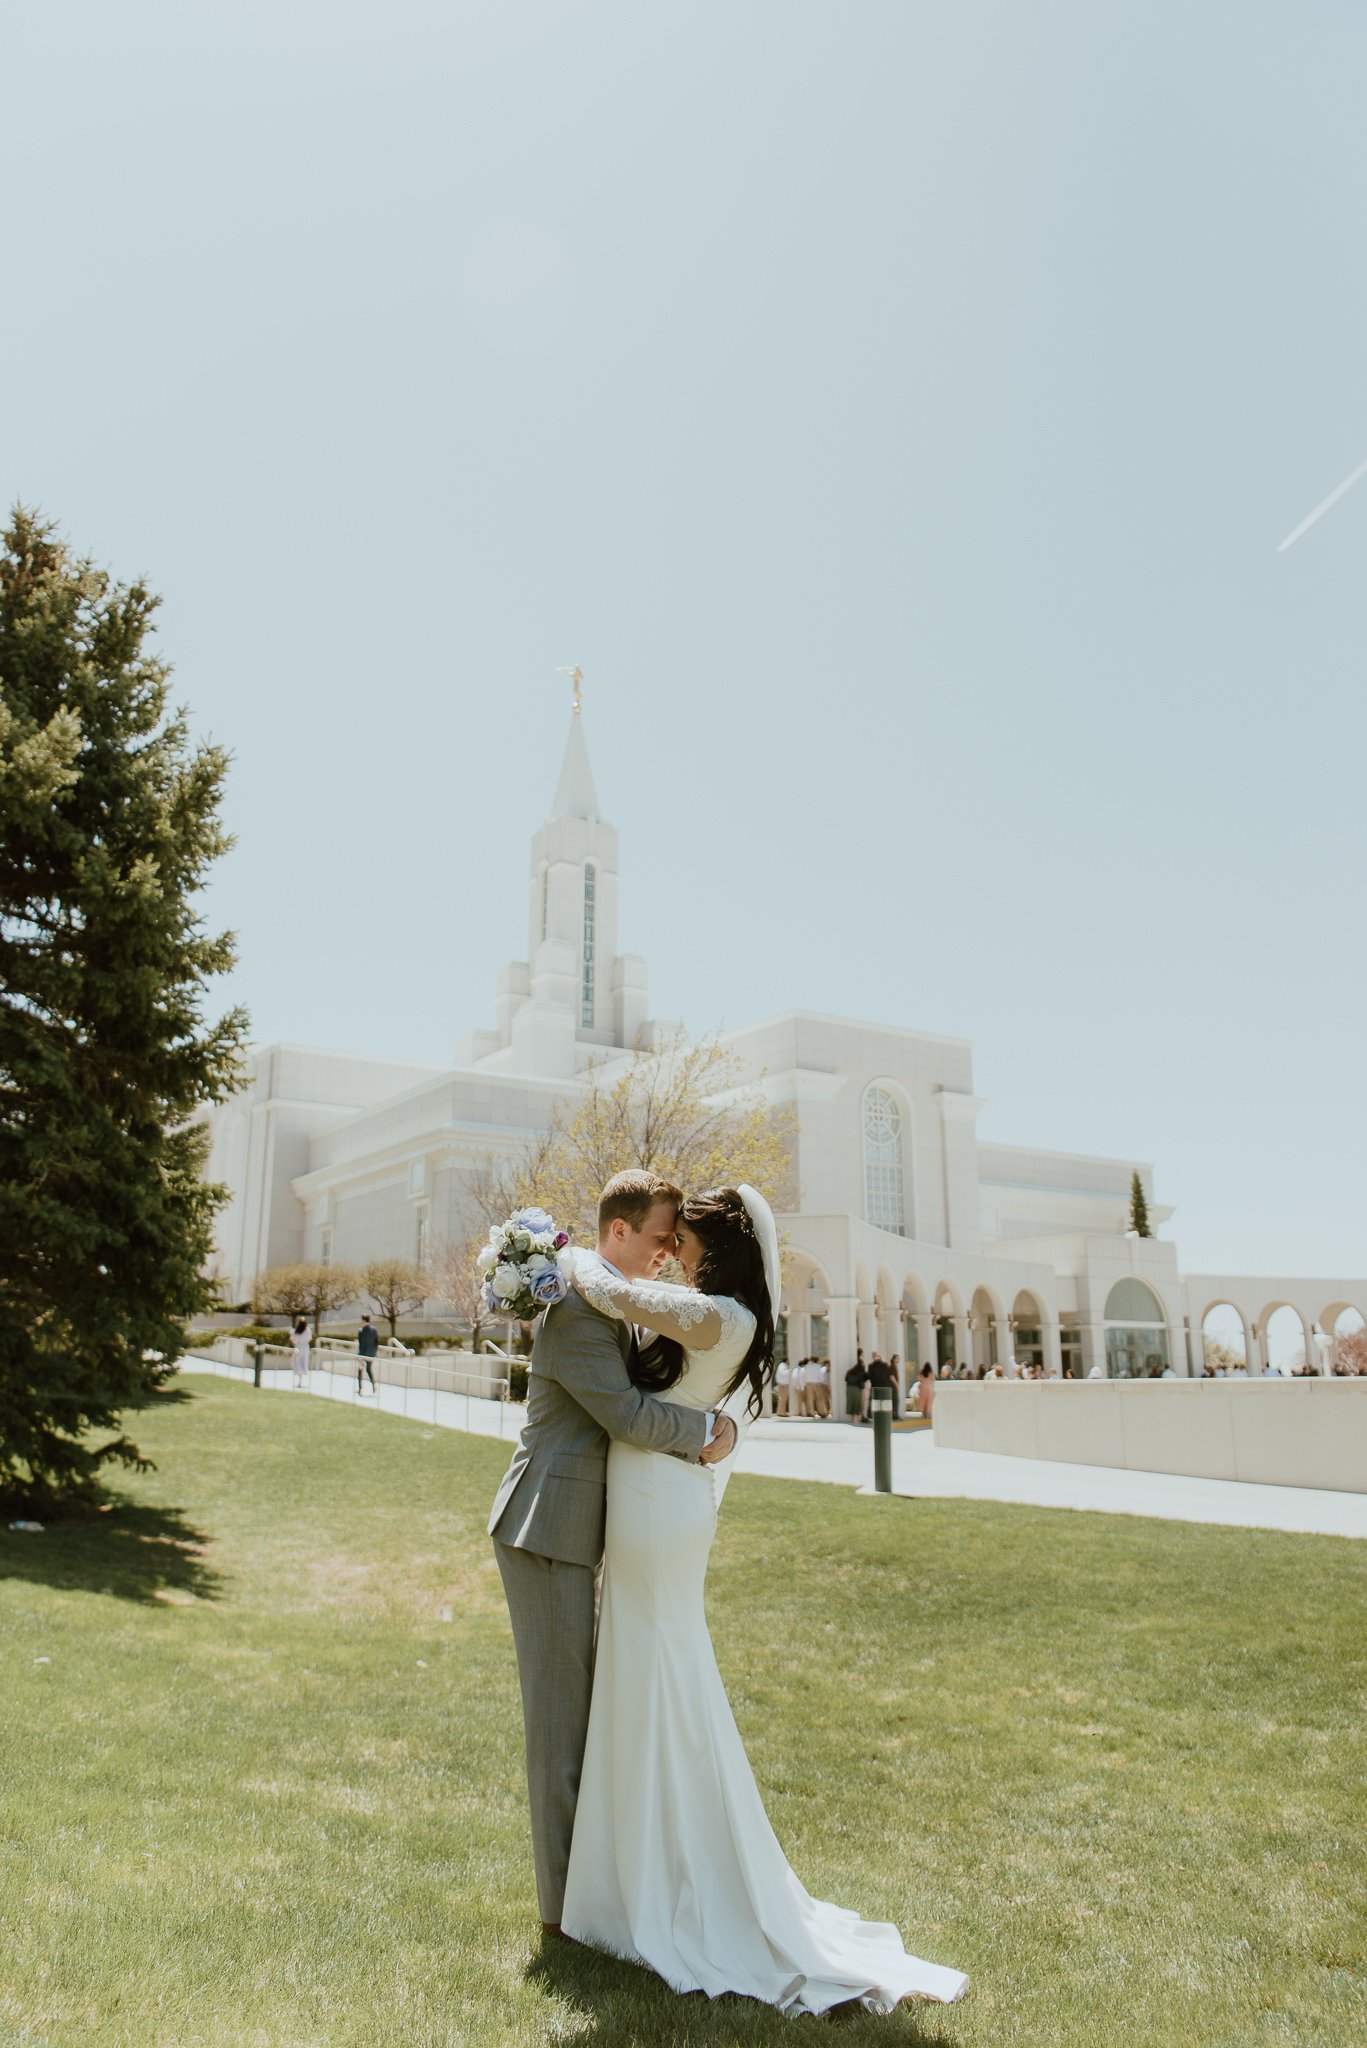 Utah-State-Capitol-Spring-Blossons-Bountiful-LDS-Wedding-Hopesandcheers-photo-52